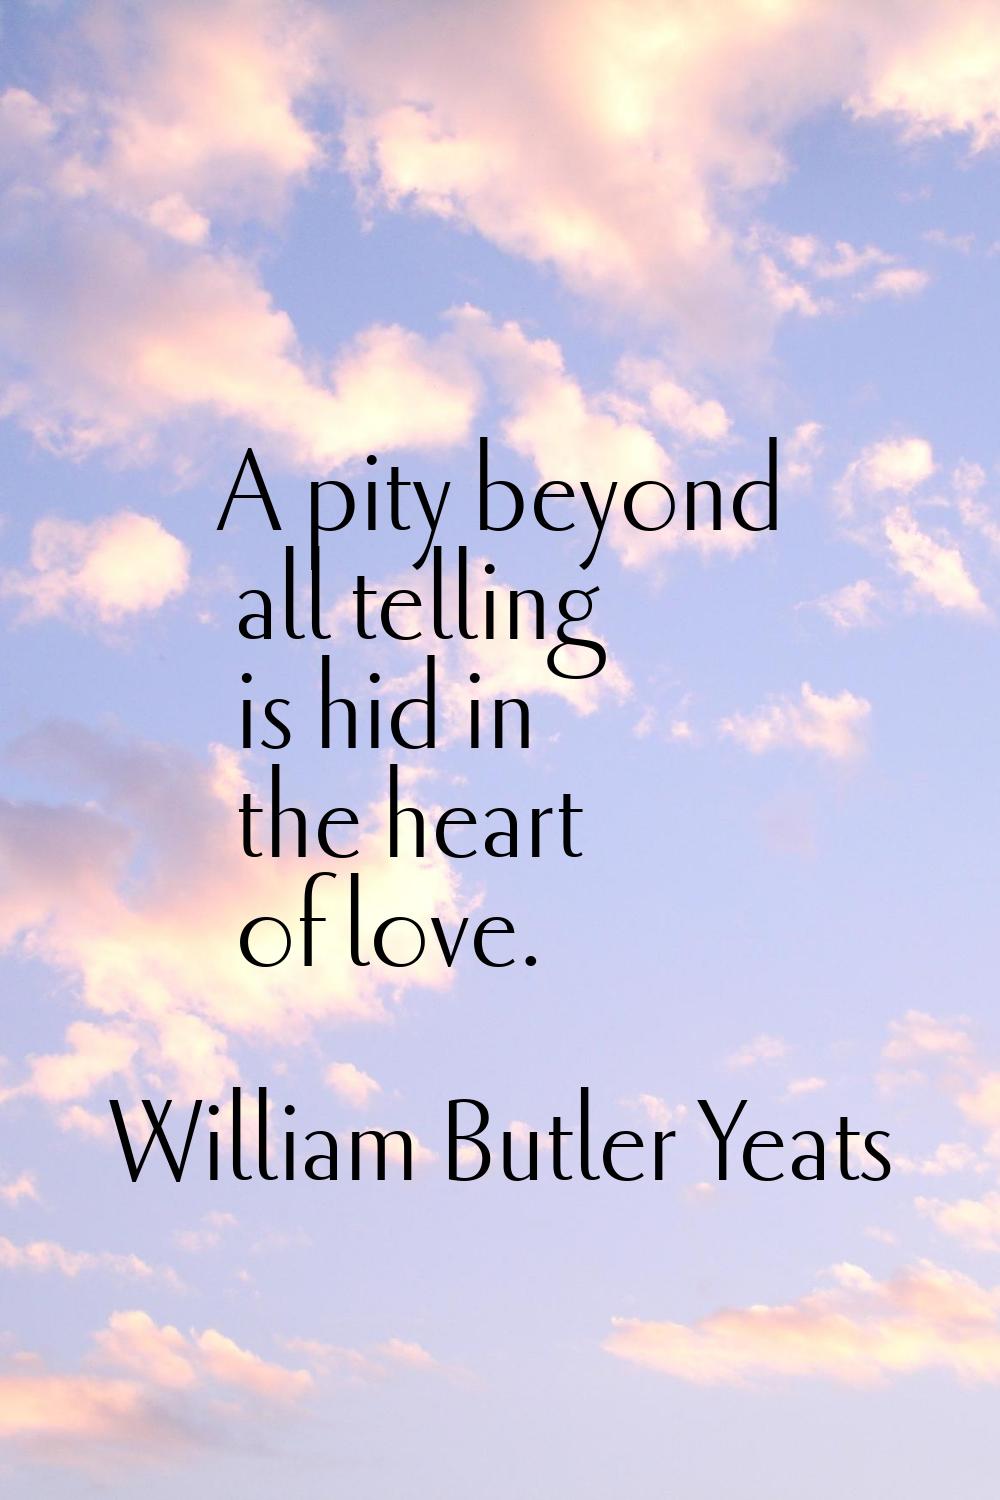 A pity beyond all telling is hid in the heart of love.